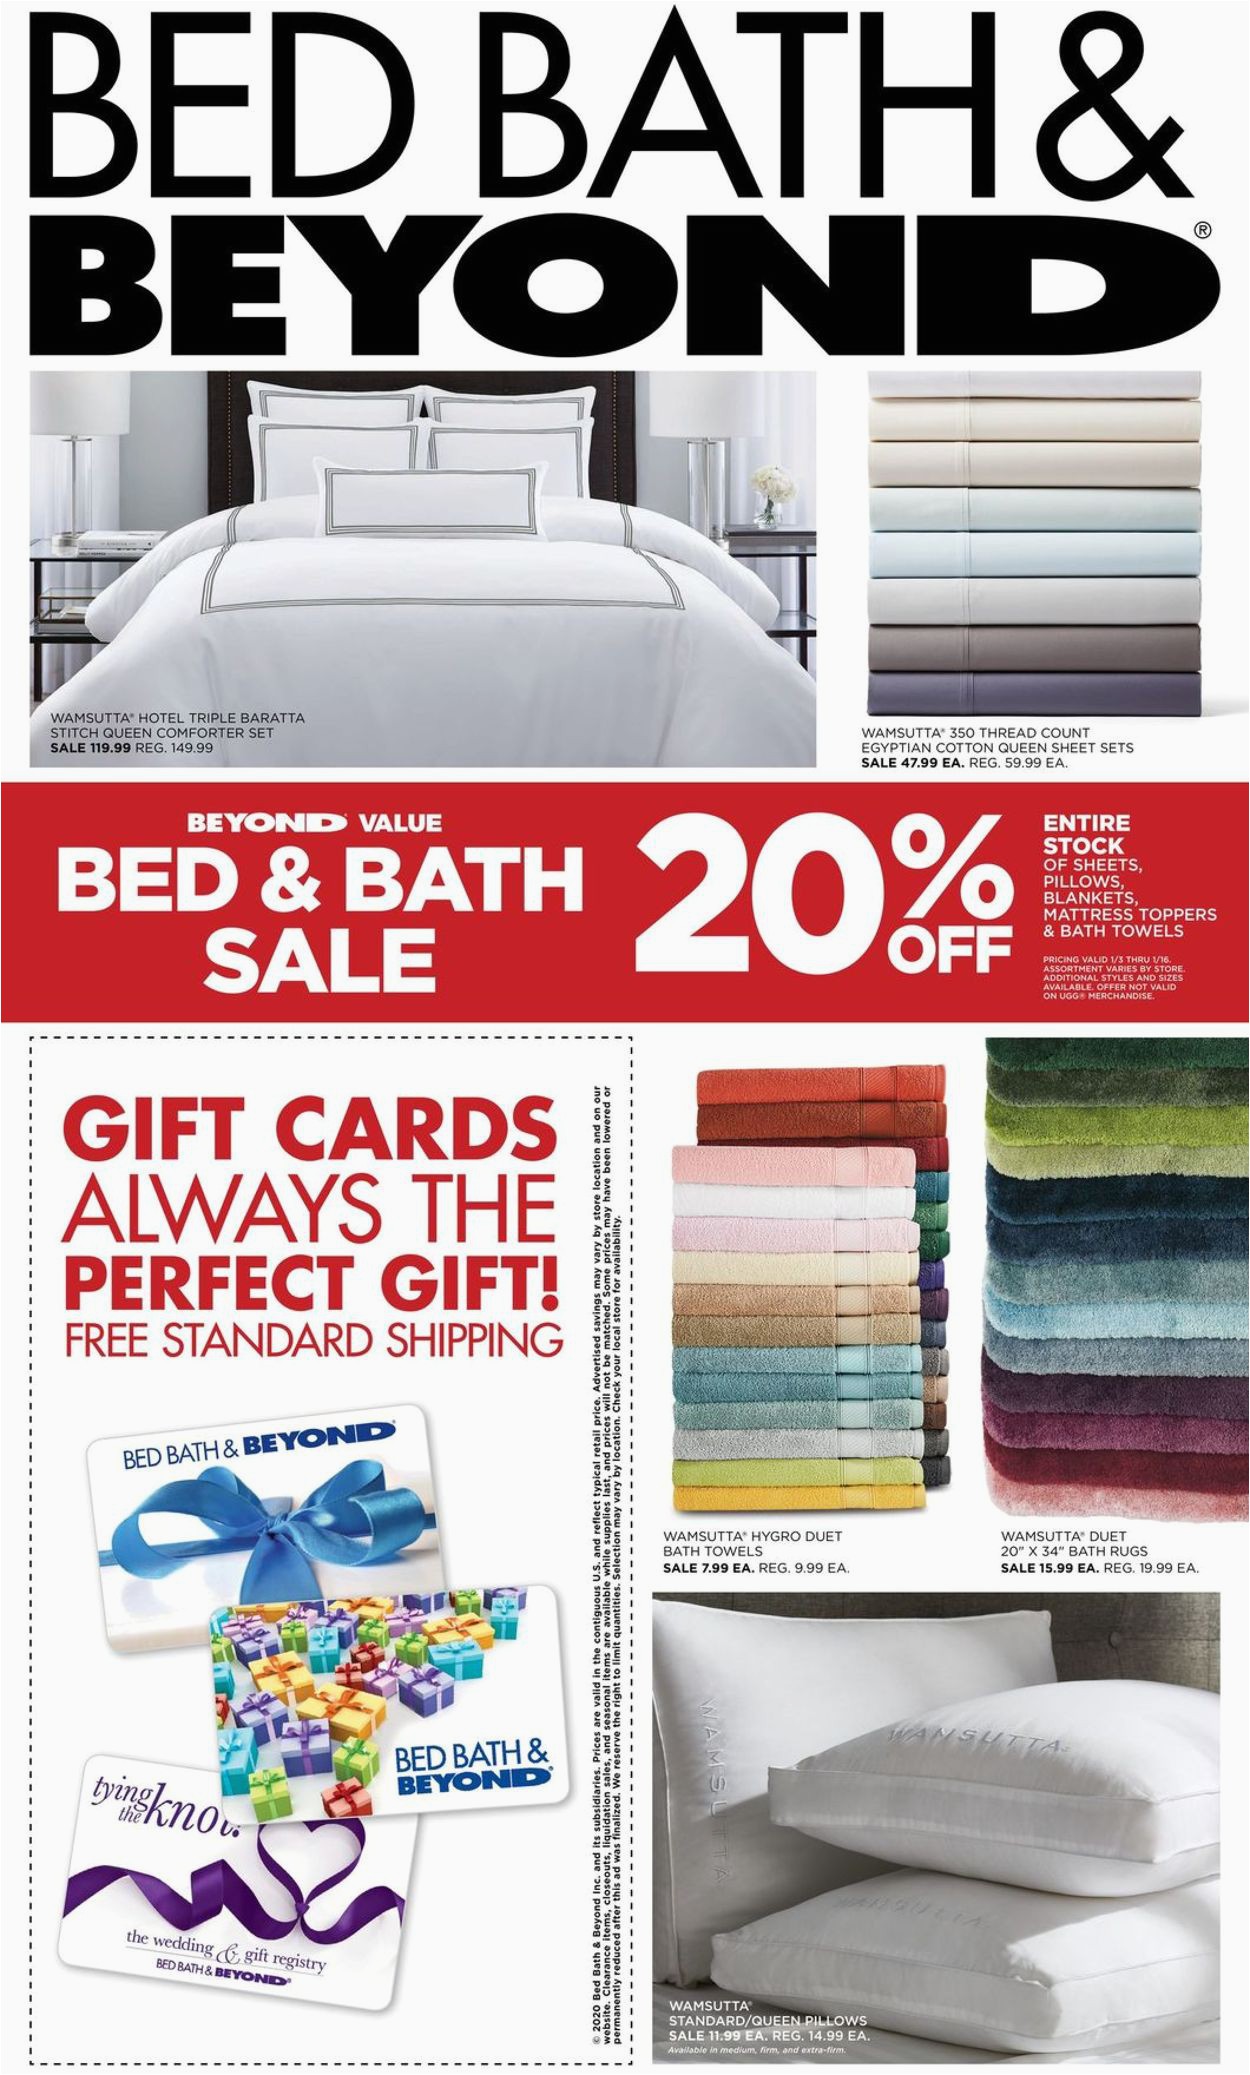 Bed Bath and Beyond Rugs In Store Bed Bath and Beyond Ad Circular 01 07 02 24 2020